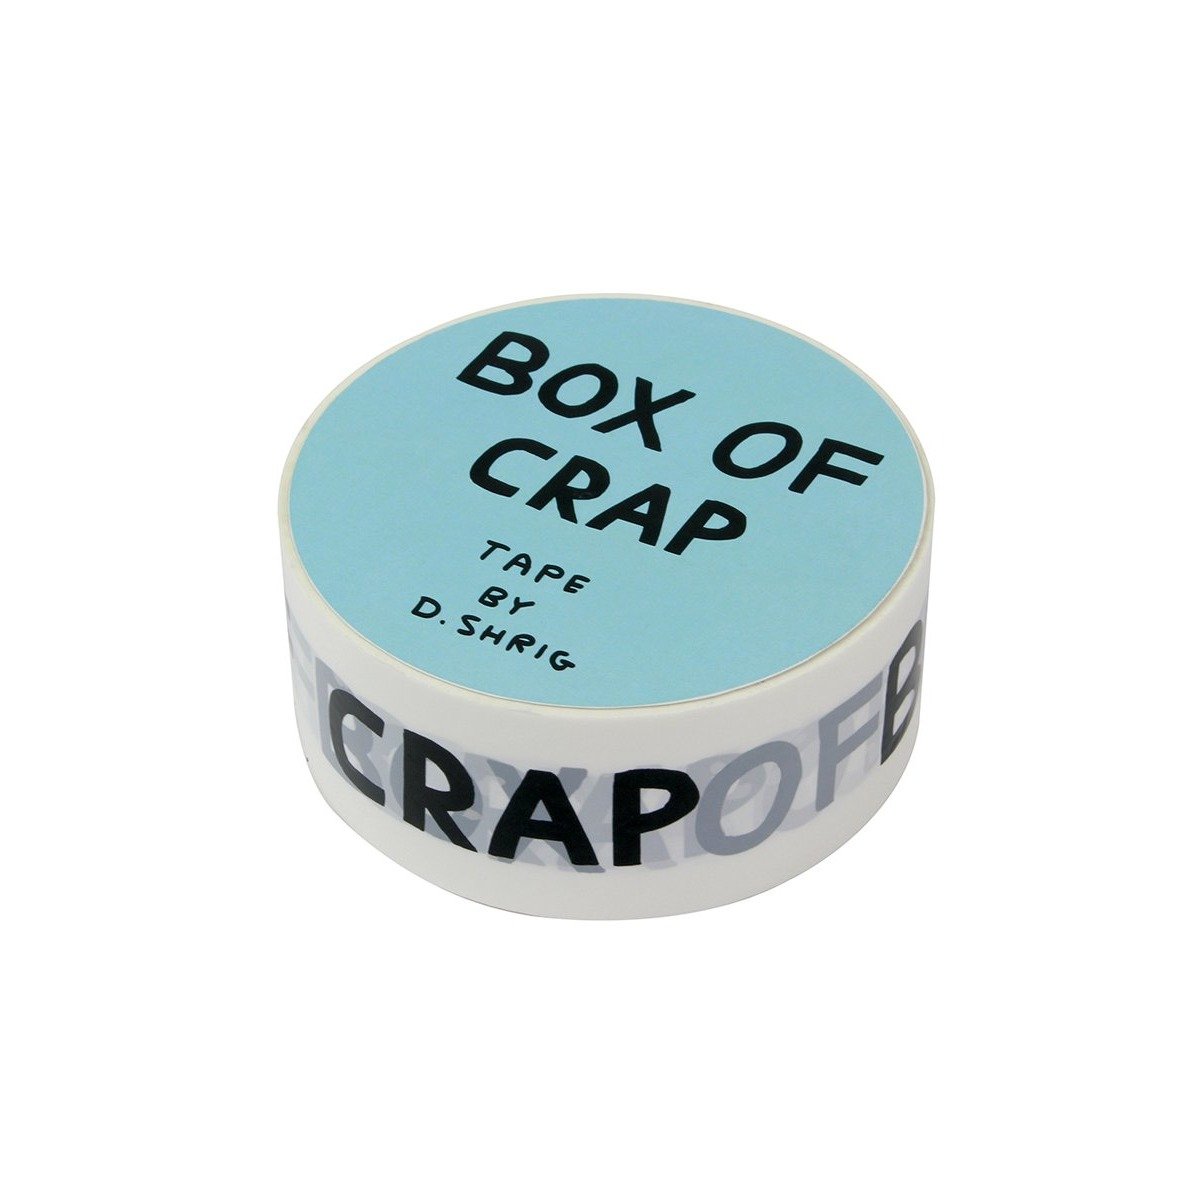 Box of Crap Tape by David Shrigley